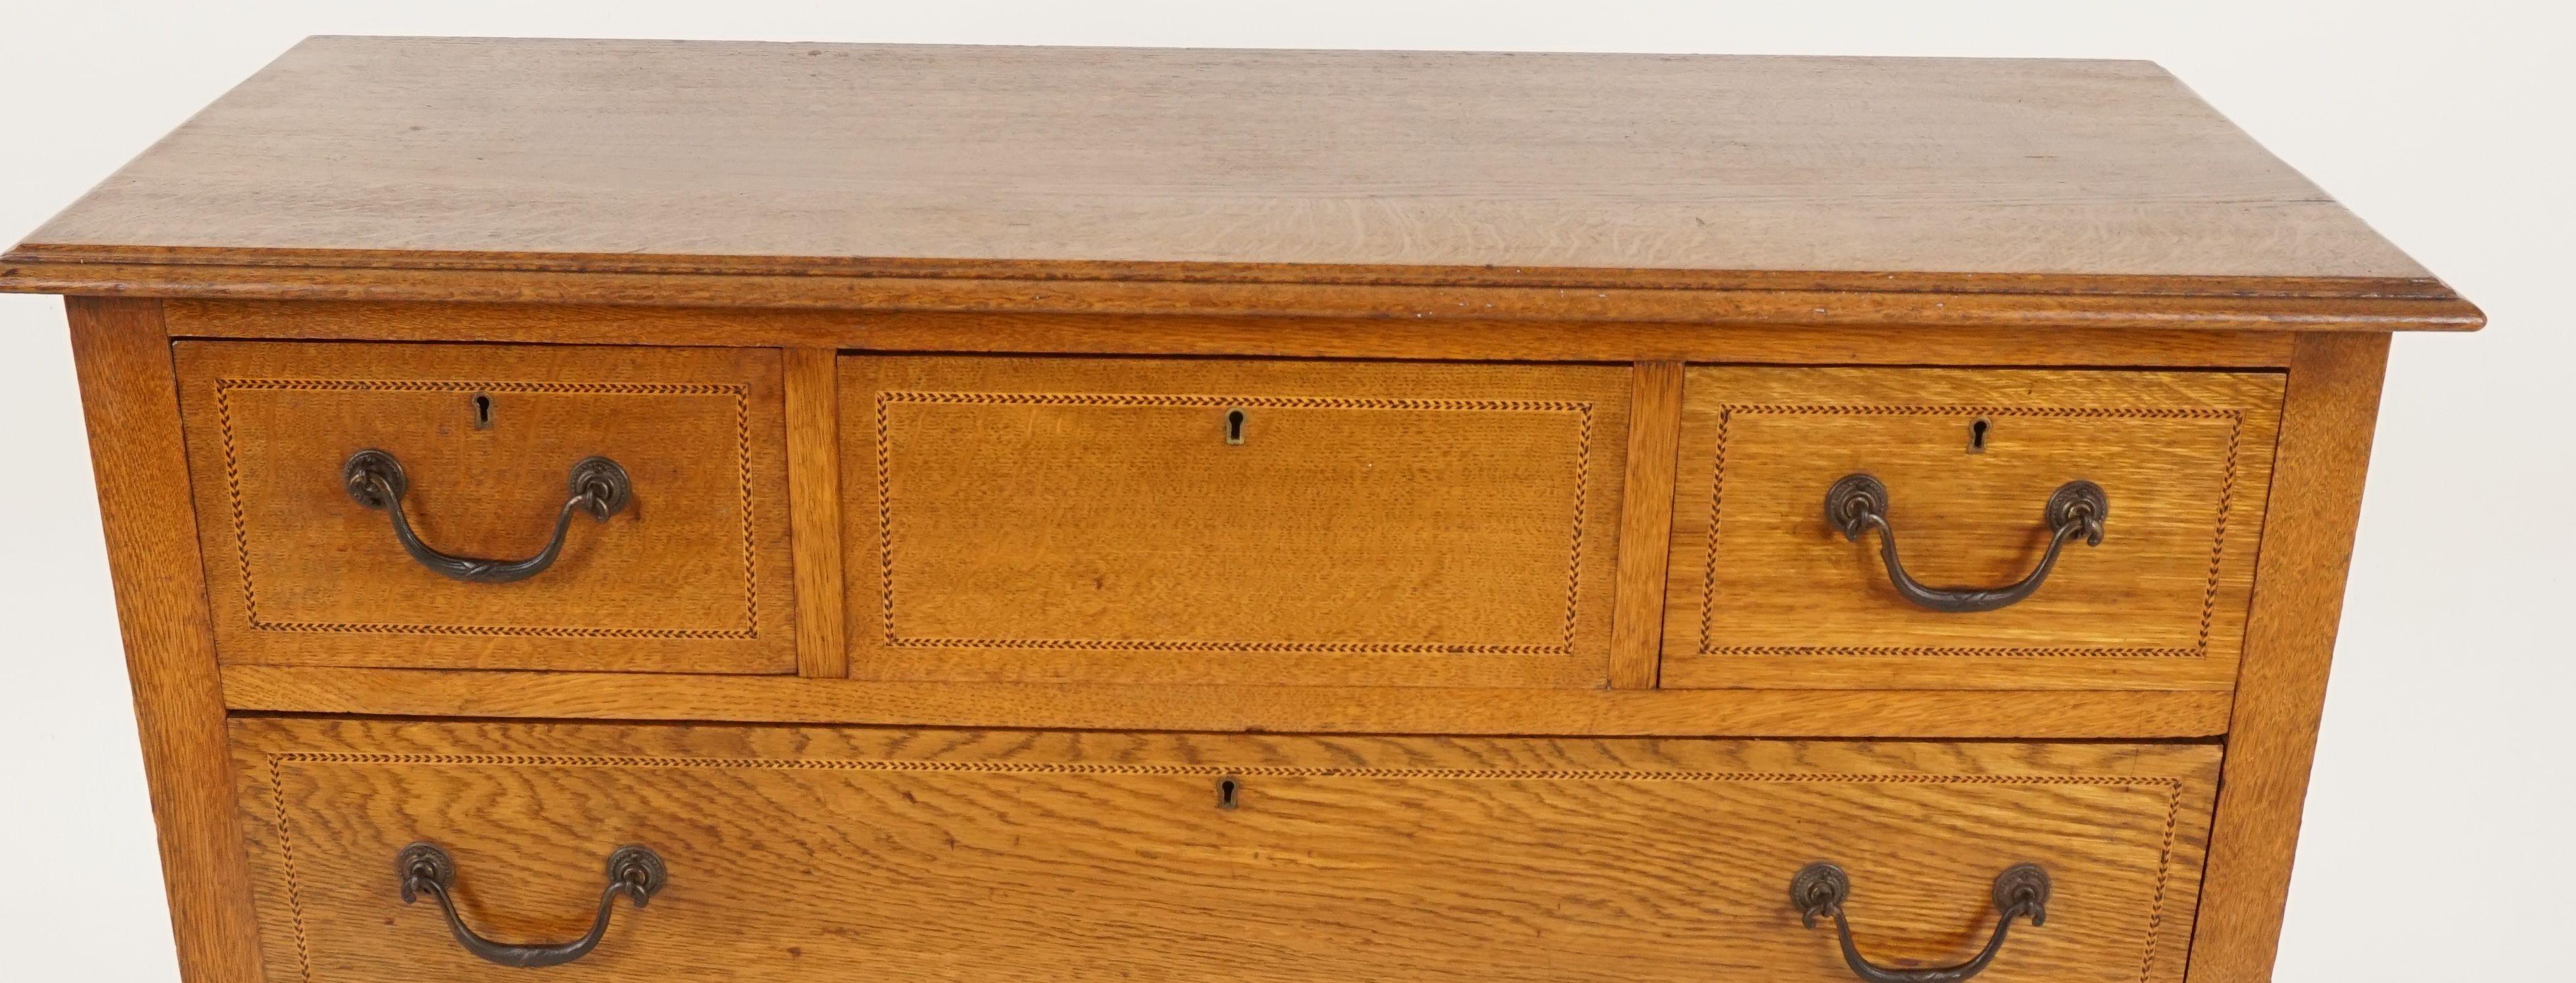 Antique Arts & Crafts inlaid oak dresser, chest of drawers, Scotland, 1910

Scotland, 1910
Solid oak and Walnut veneer
Original finish
Rectangular moulded top
Central inlaid drawer
Flanked by a pair of short dovetailed drawers
Three graduated inlaid